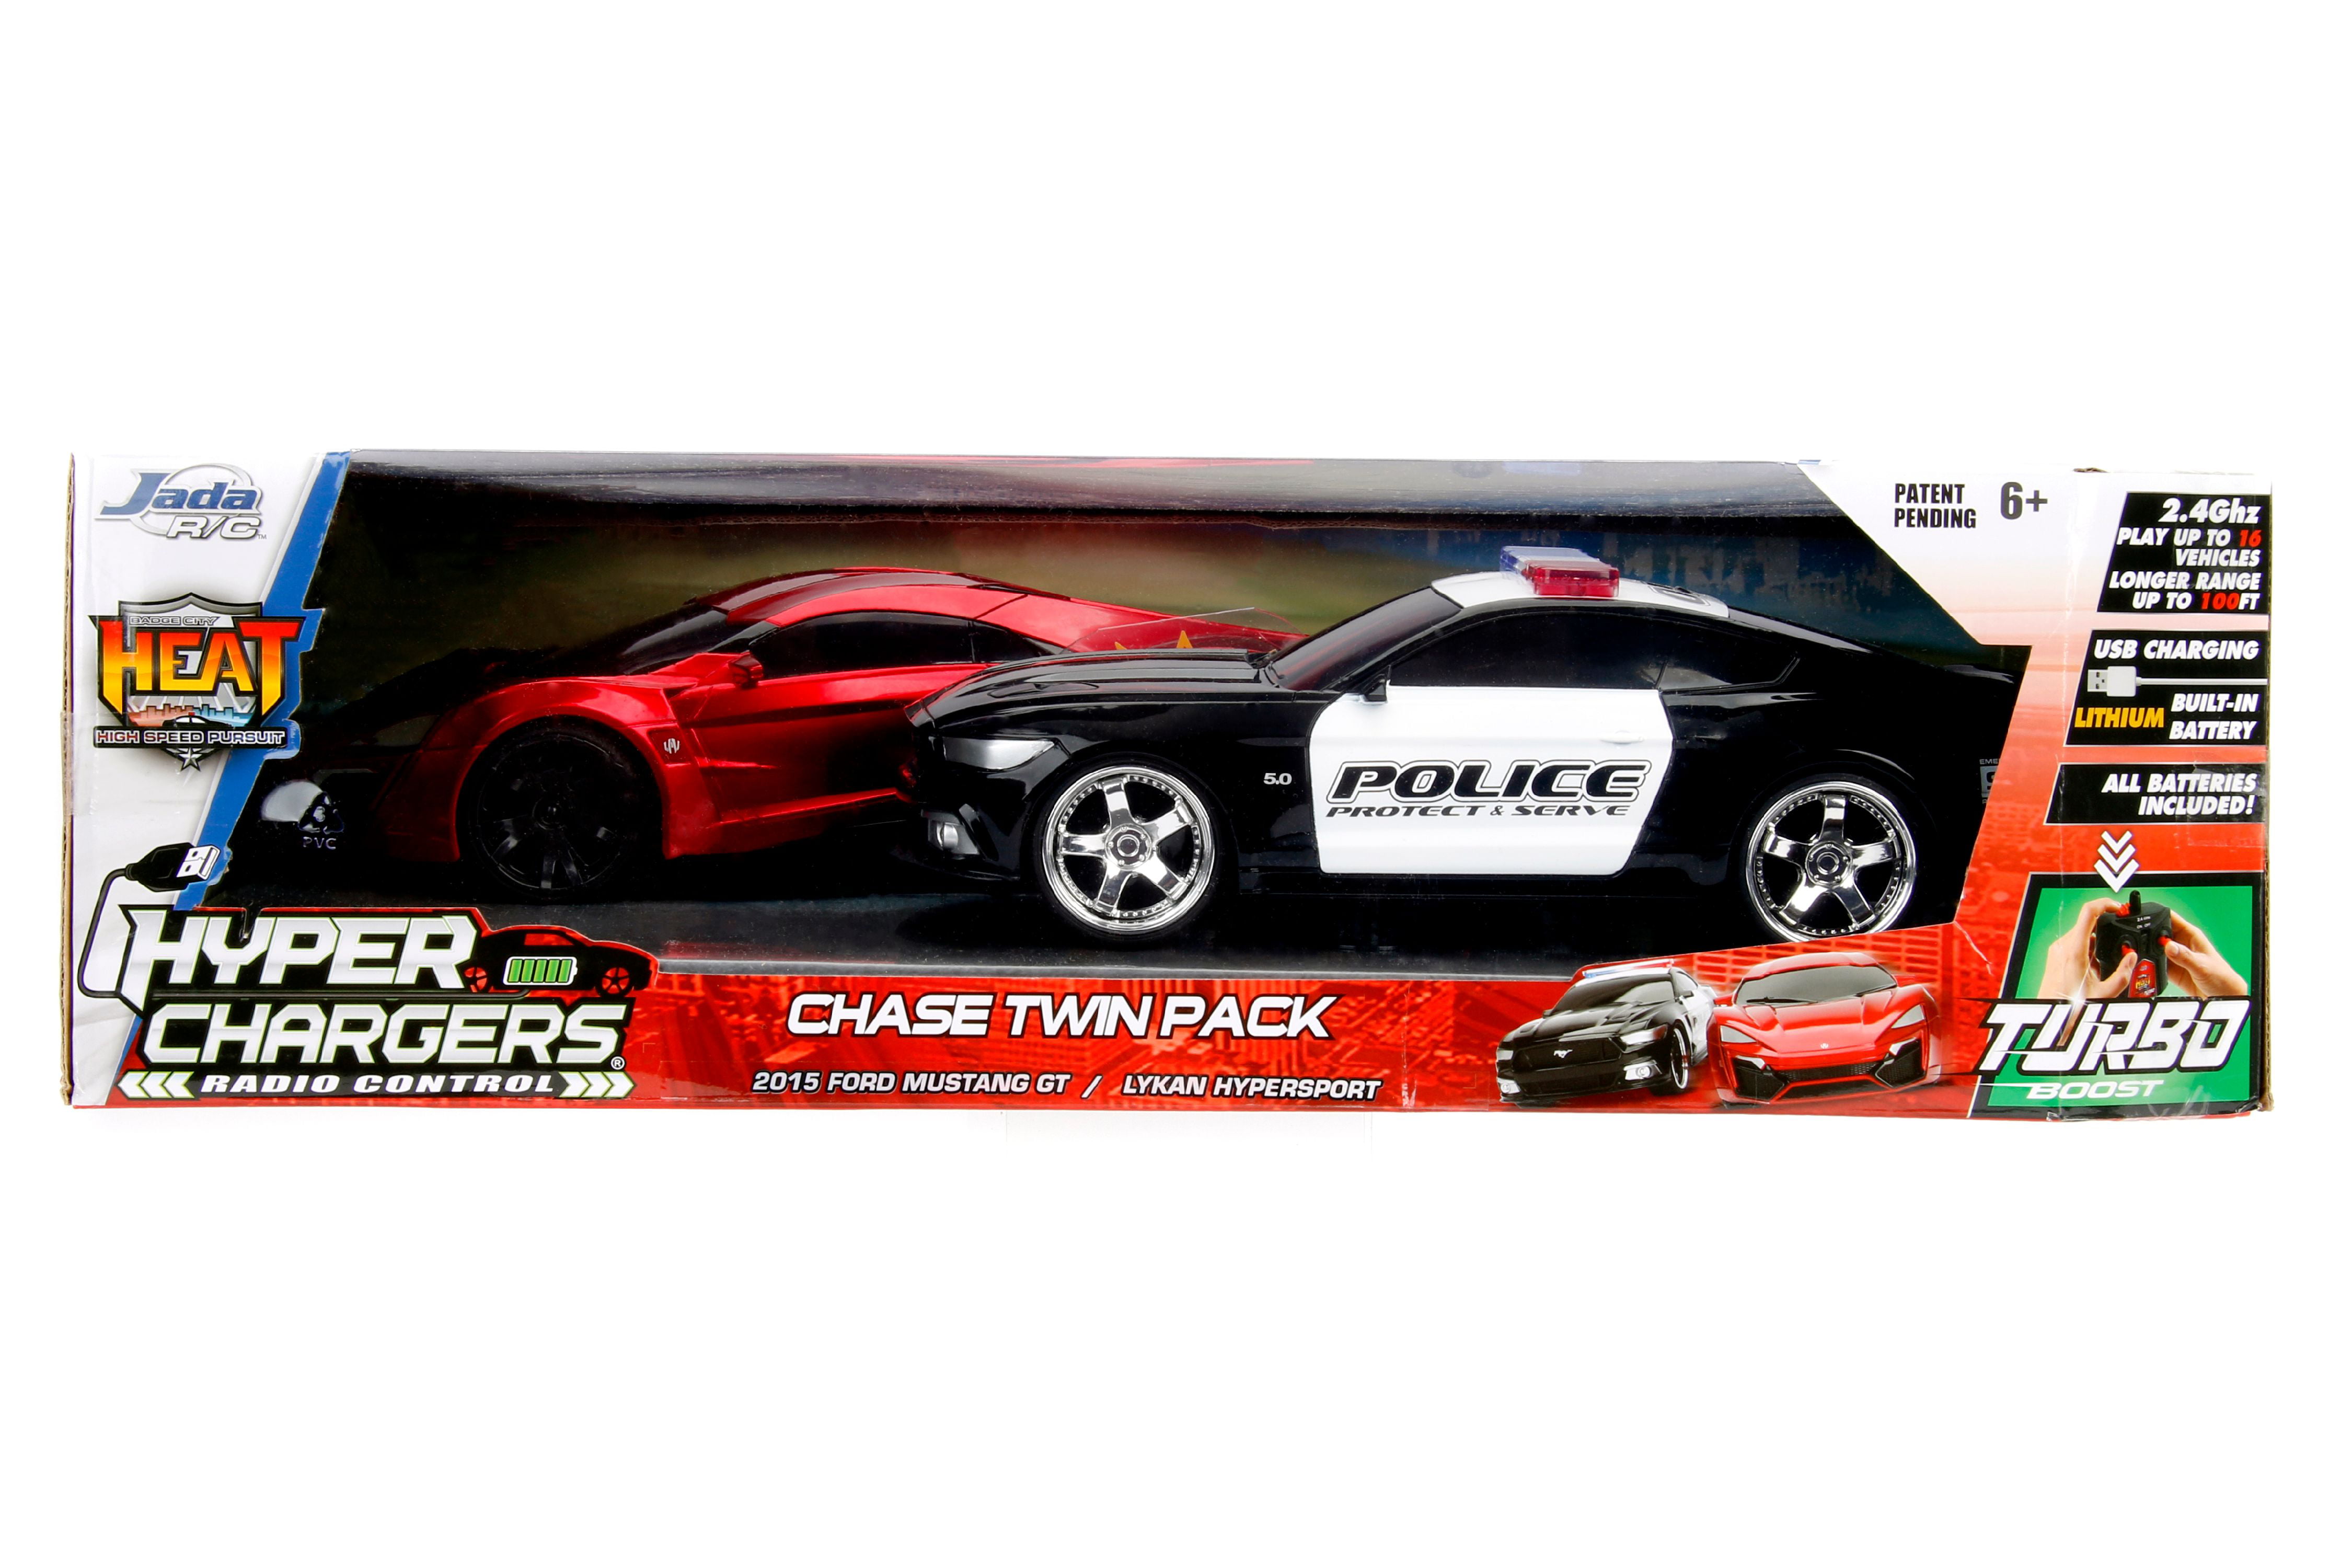 Jada Toys Hyperchargers Heat Chase CARS Twin Pack RC REMOTE CONTROL TOY POLICE 